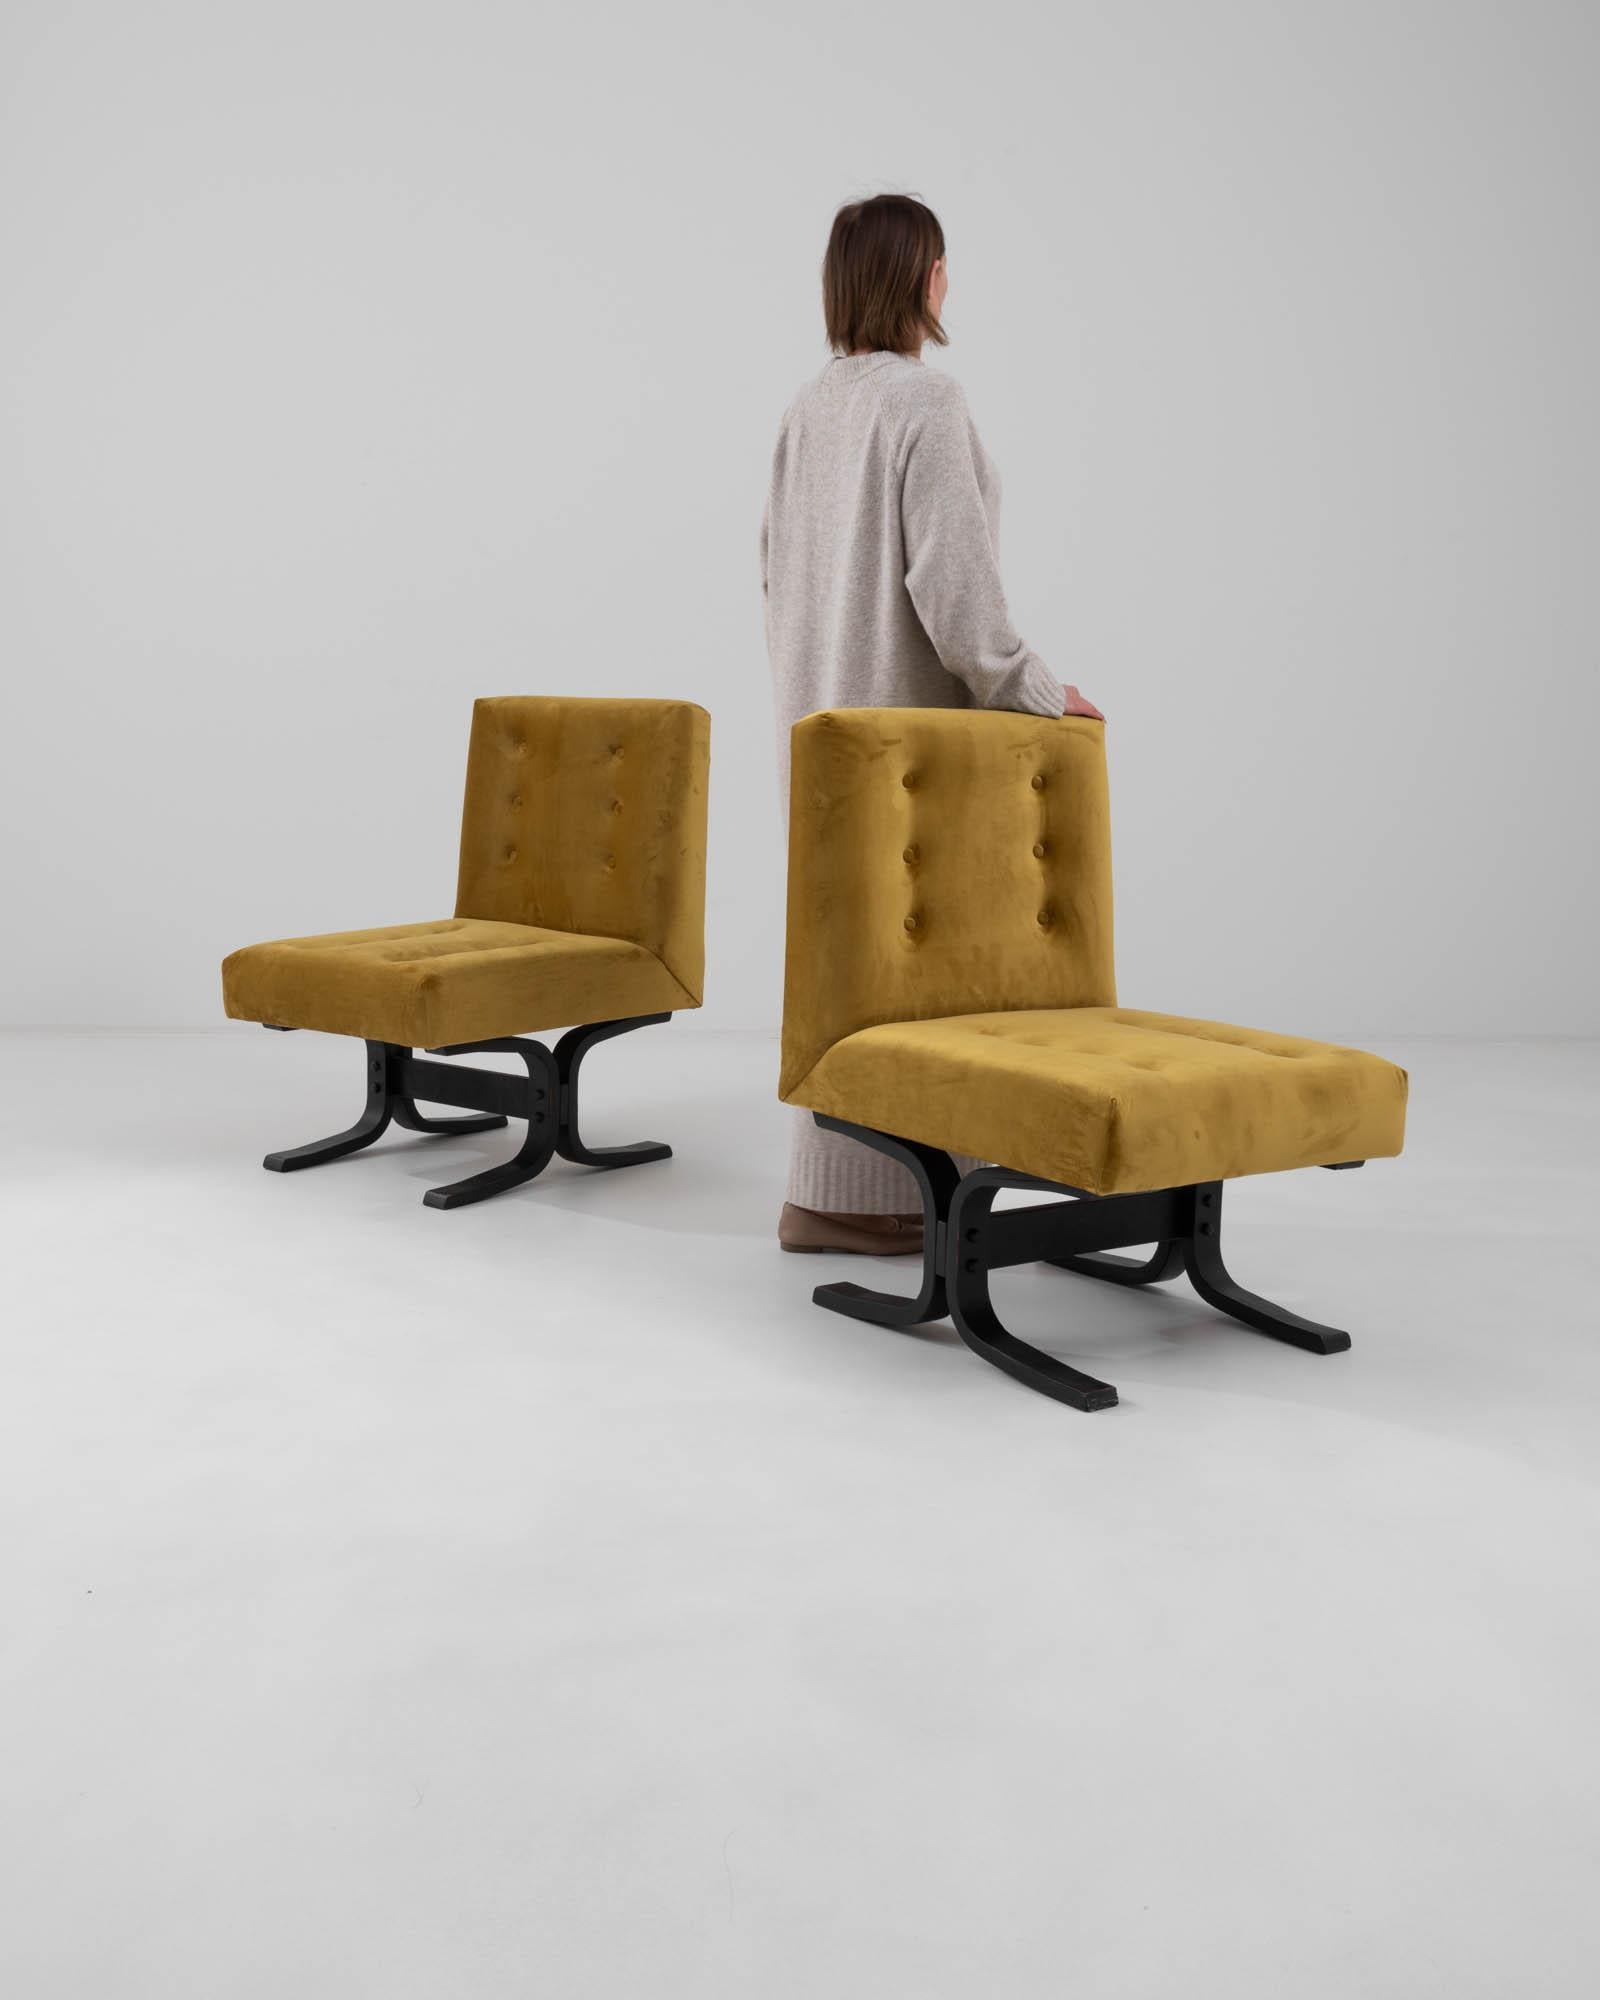 Tchèque 1960 Czechia Chairs Upholstered Chairs by Ludvik Volak, Set of 2 en vente